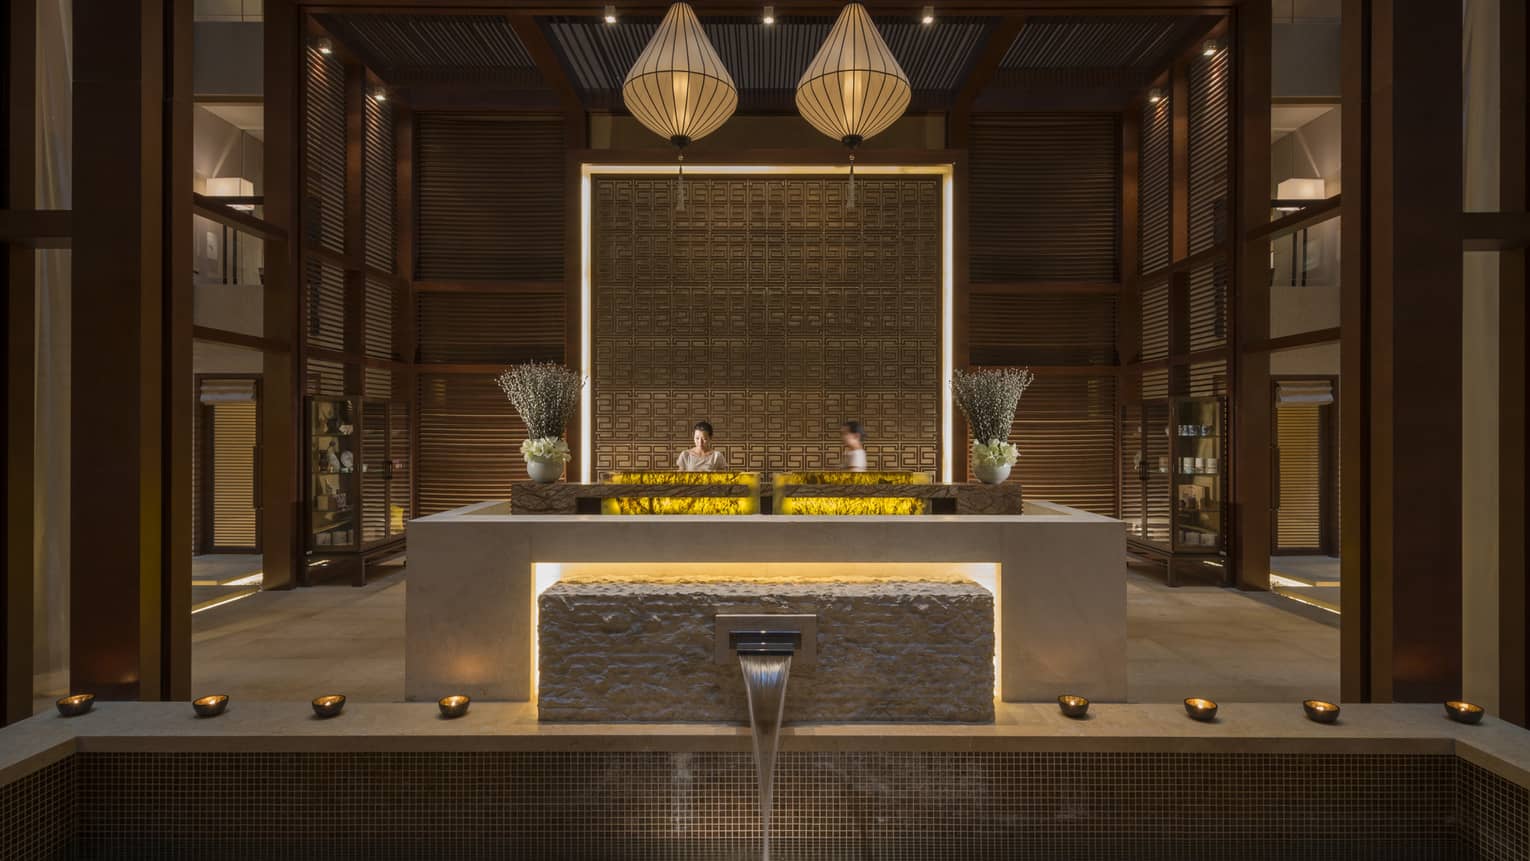 Water pours from fountain into tile pool in front of hotel spa lobby desk